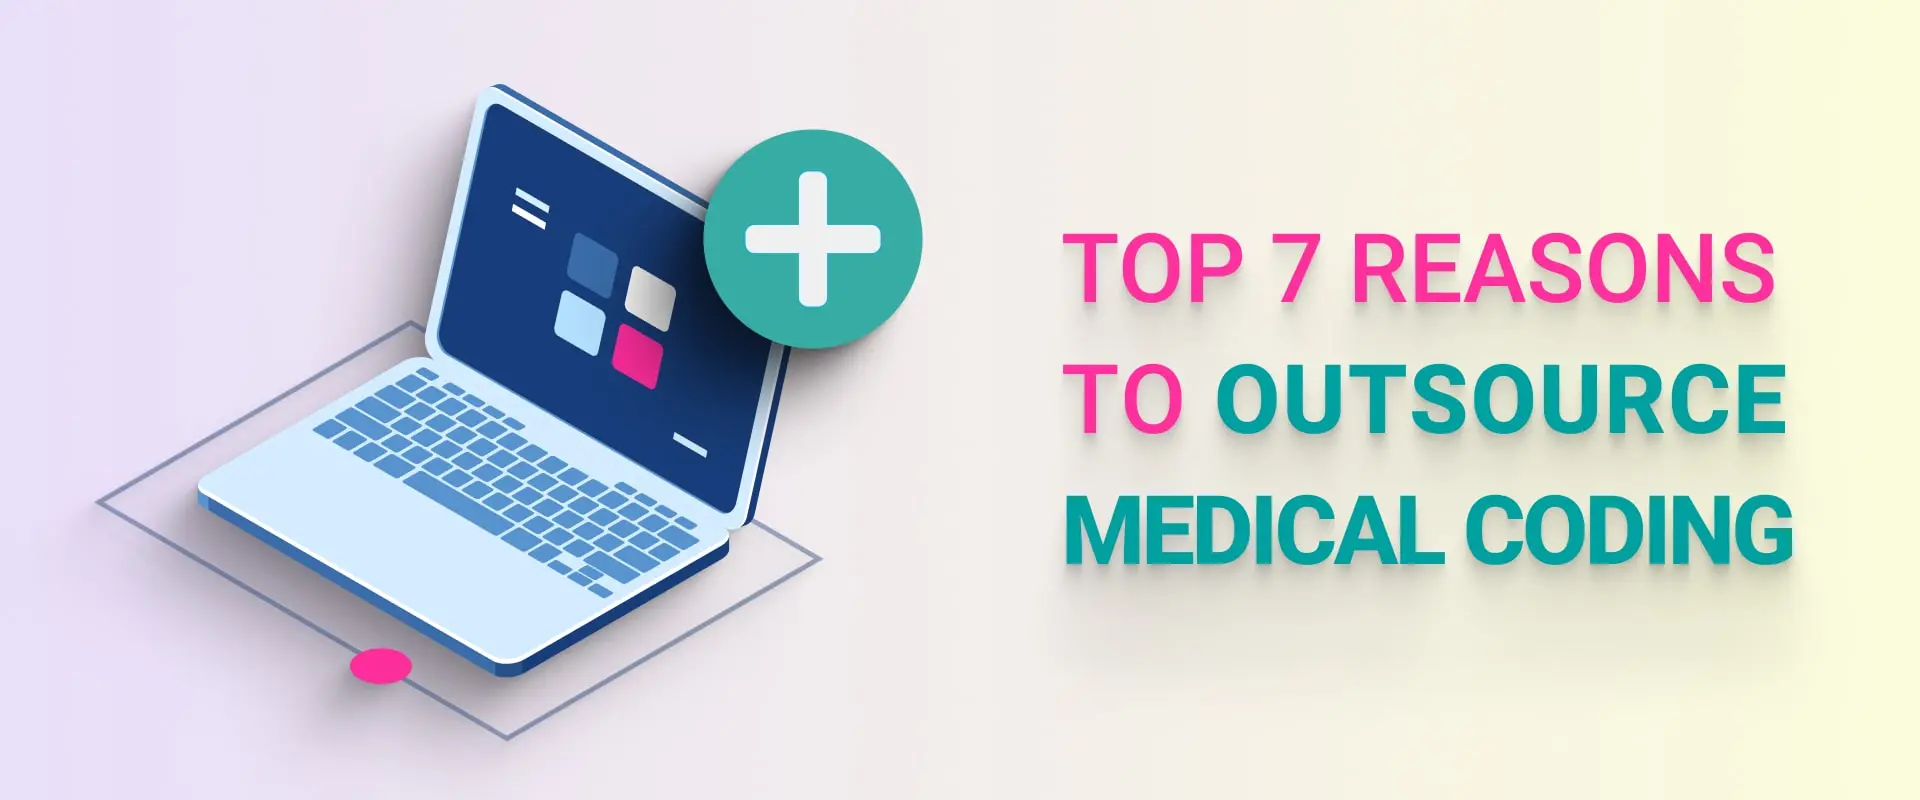 Reasons to Outsource Medical Coding